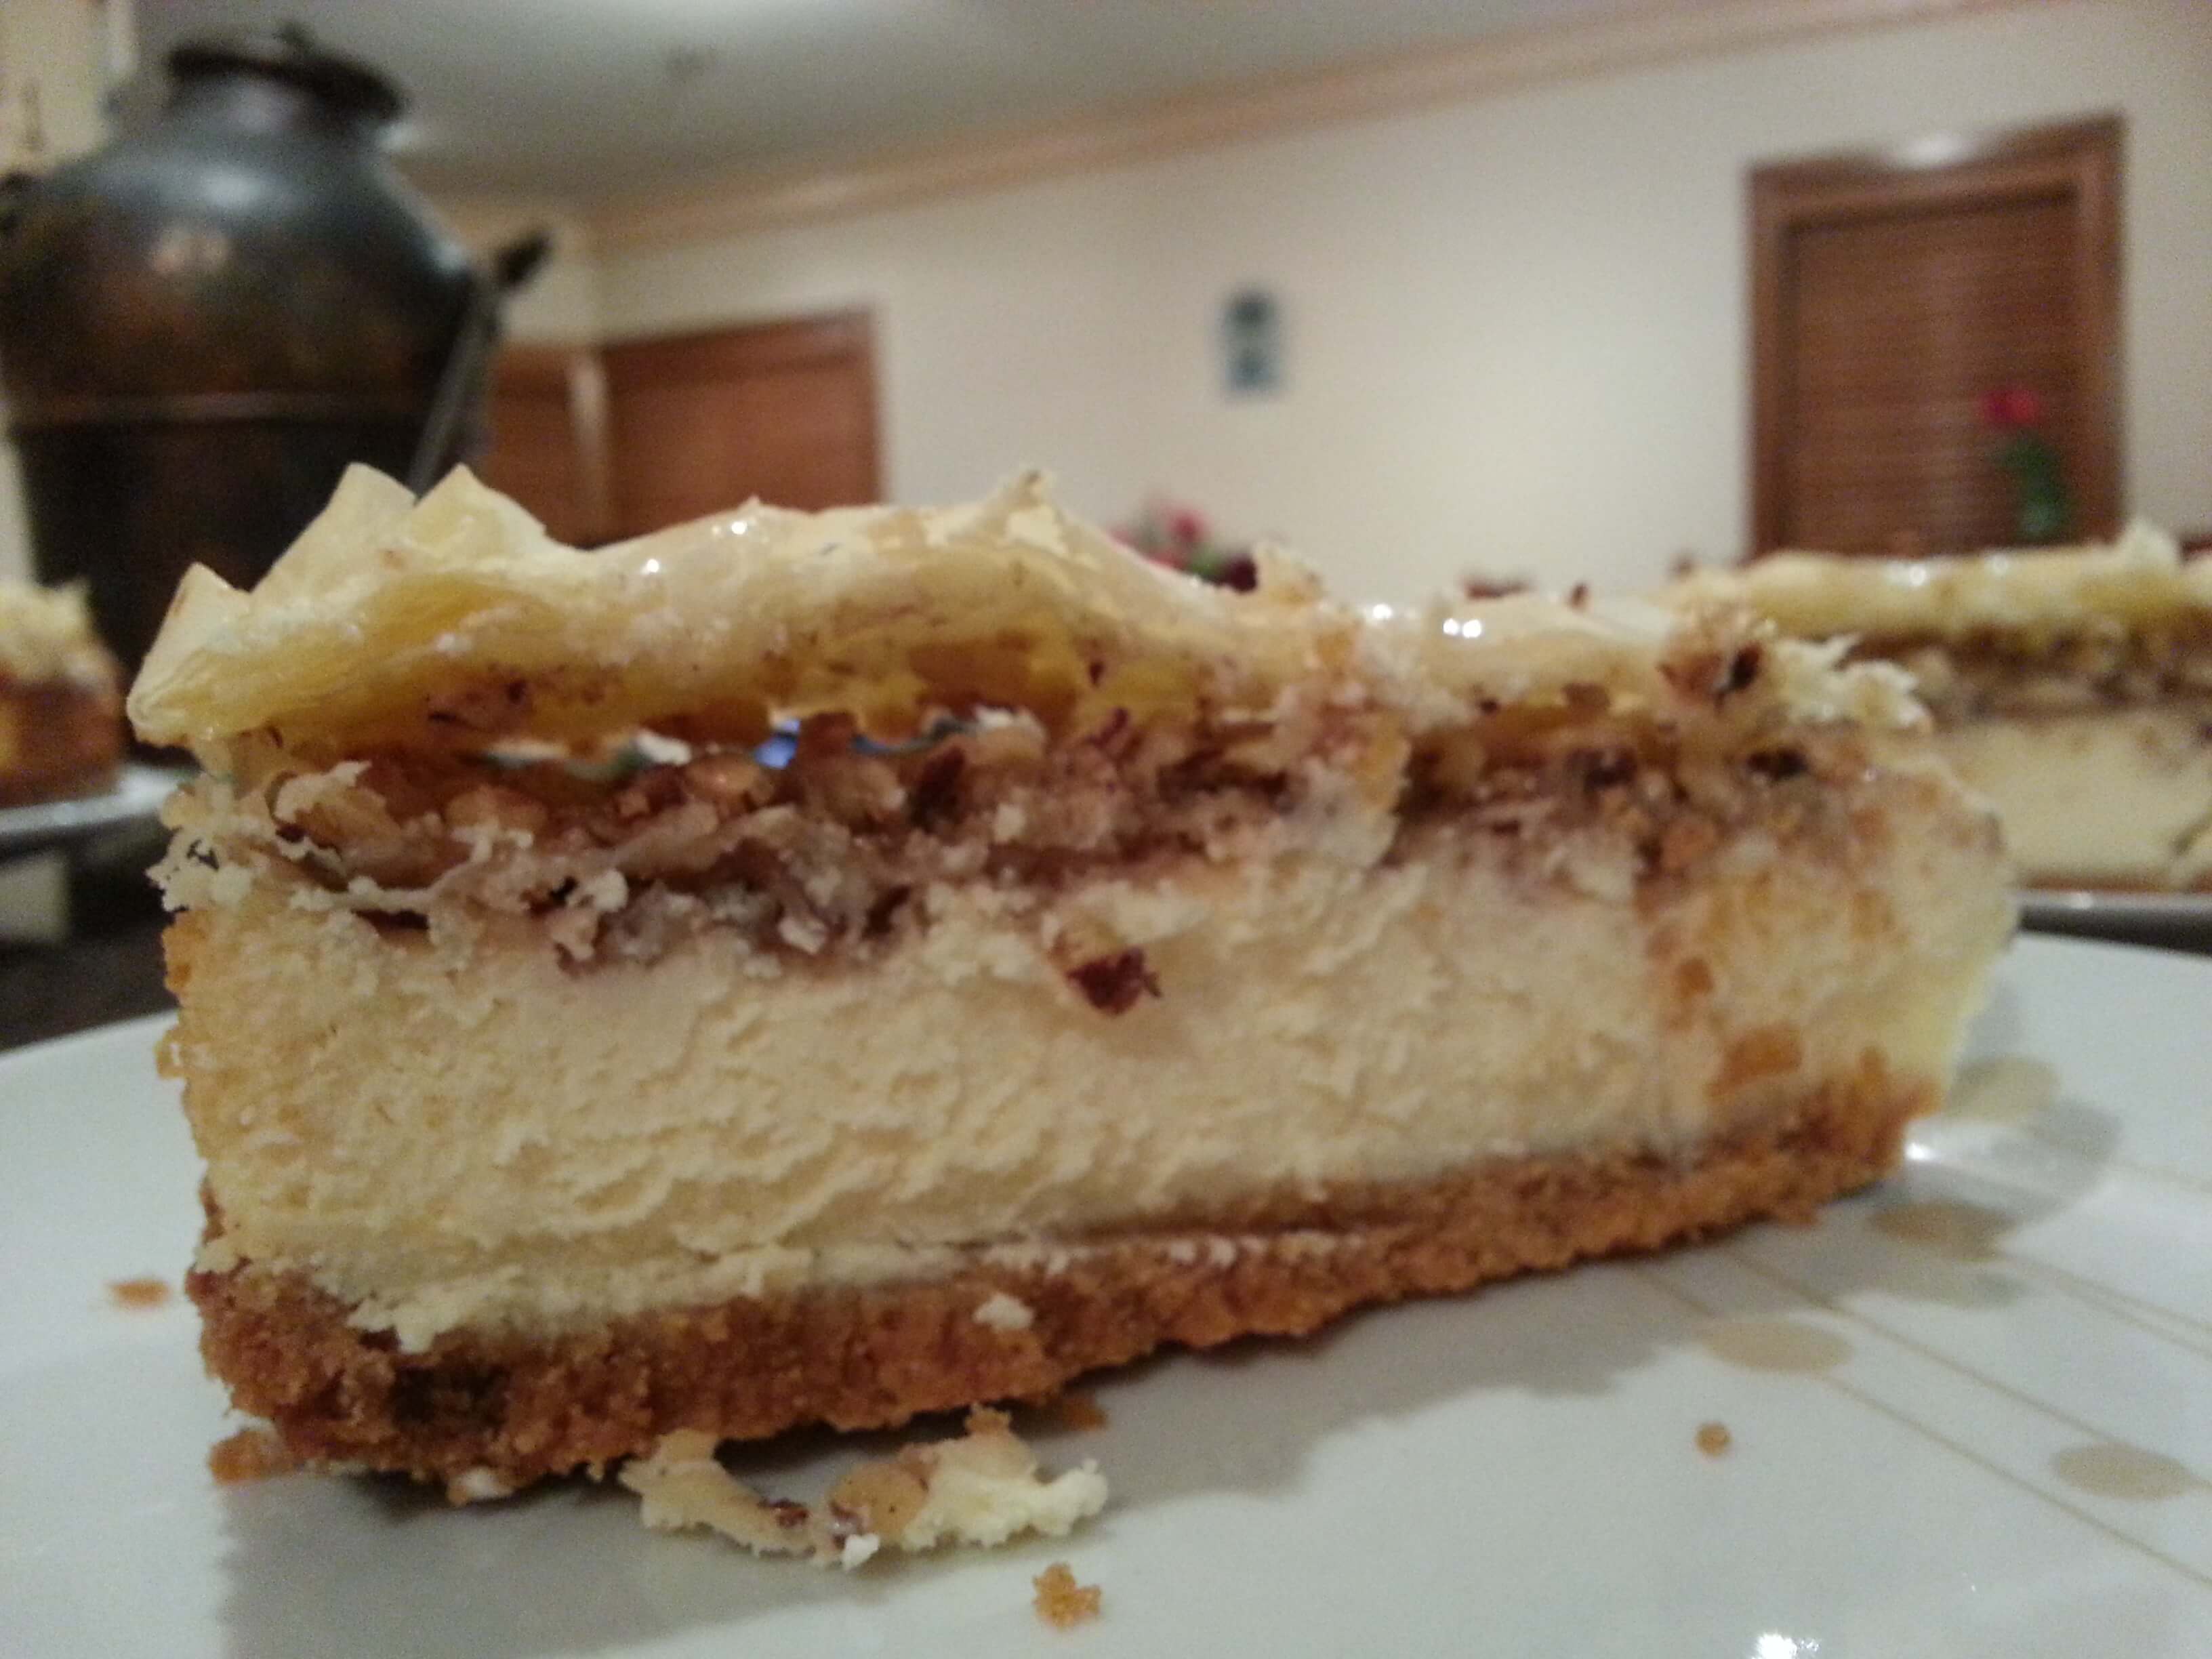 East meets West in this baklwa cheesecake. By: Miran Hosny